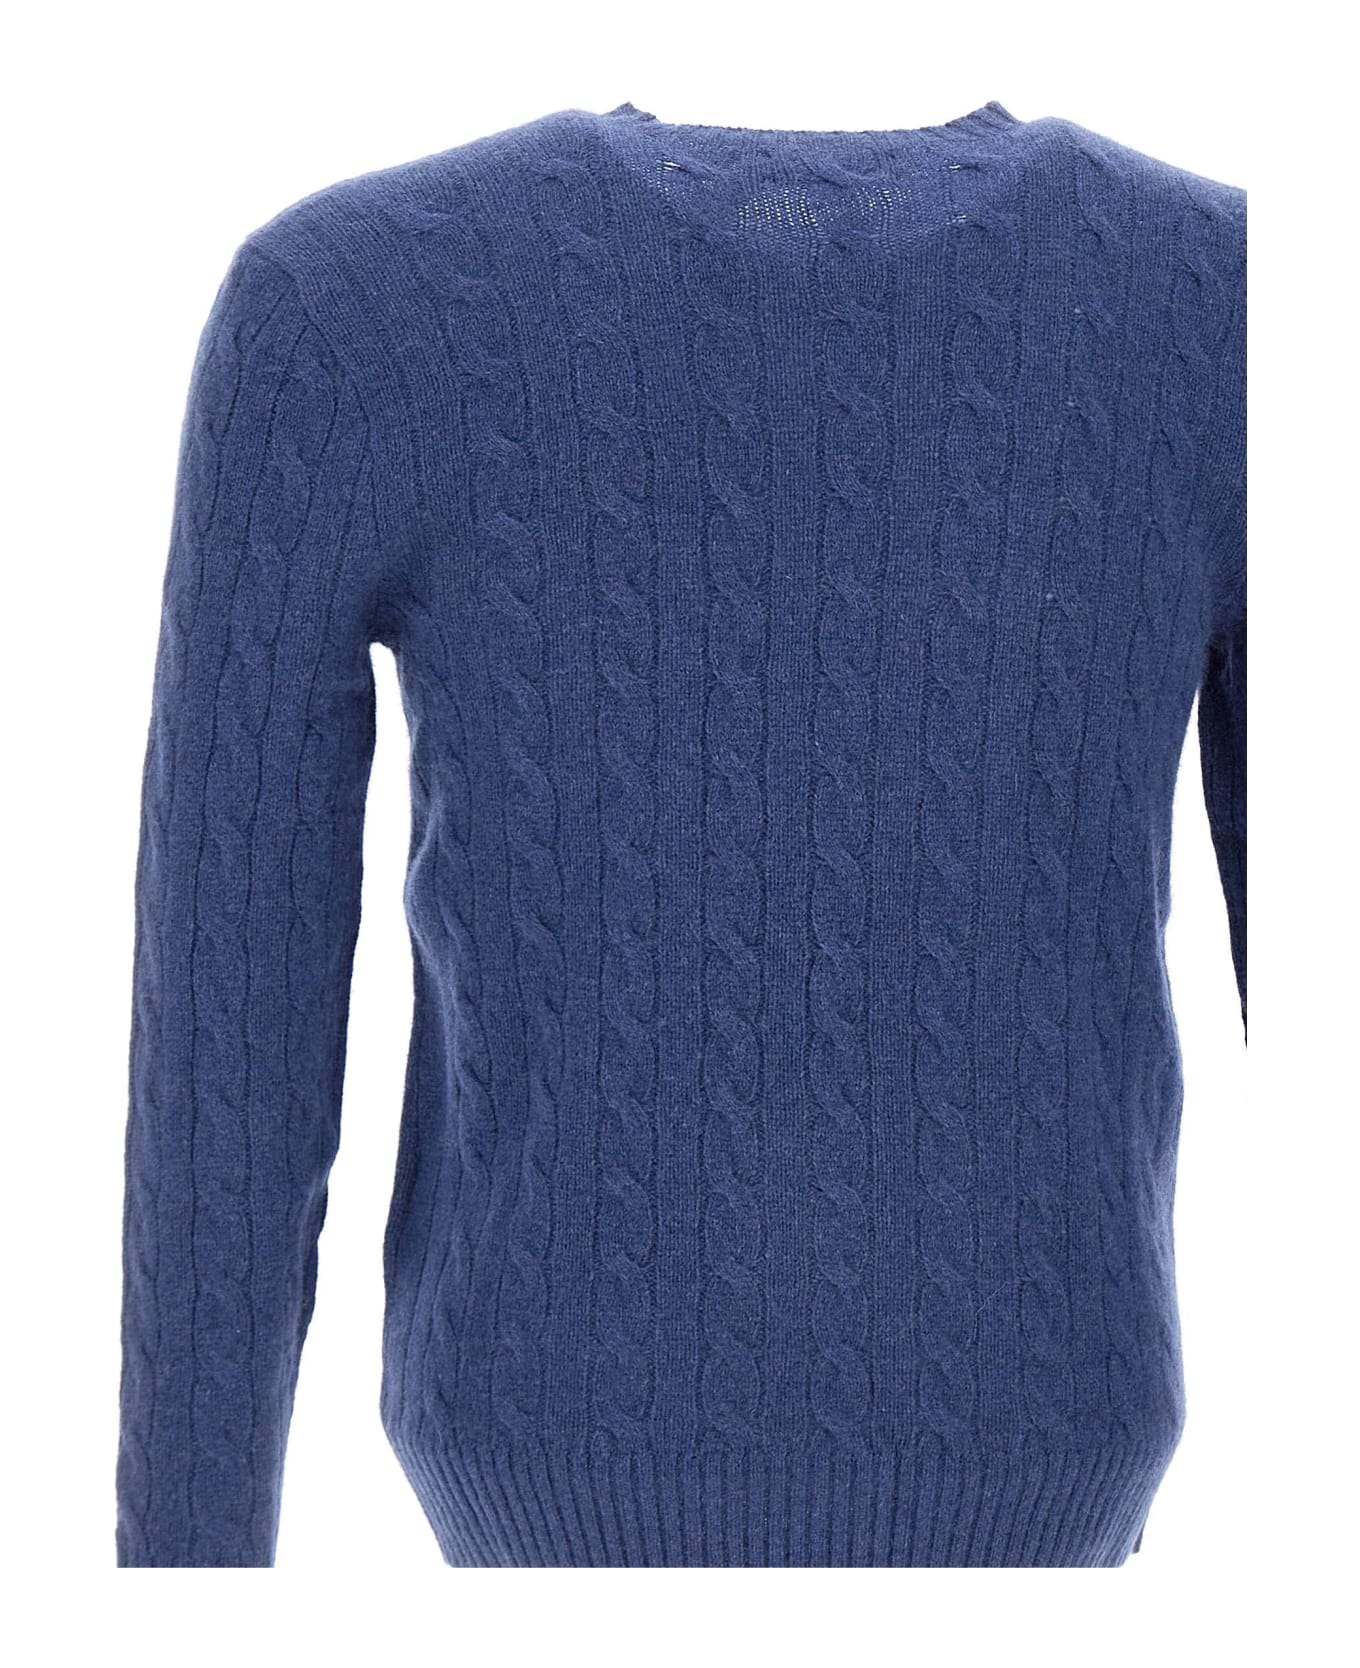 Polo Ralph Lauren Wool And Cashmere Sweater - Blue